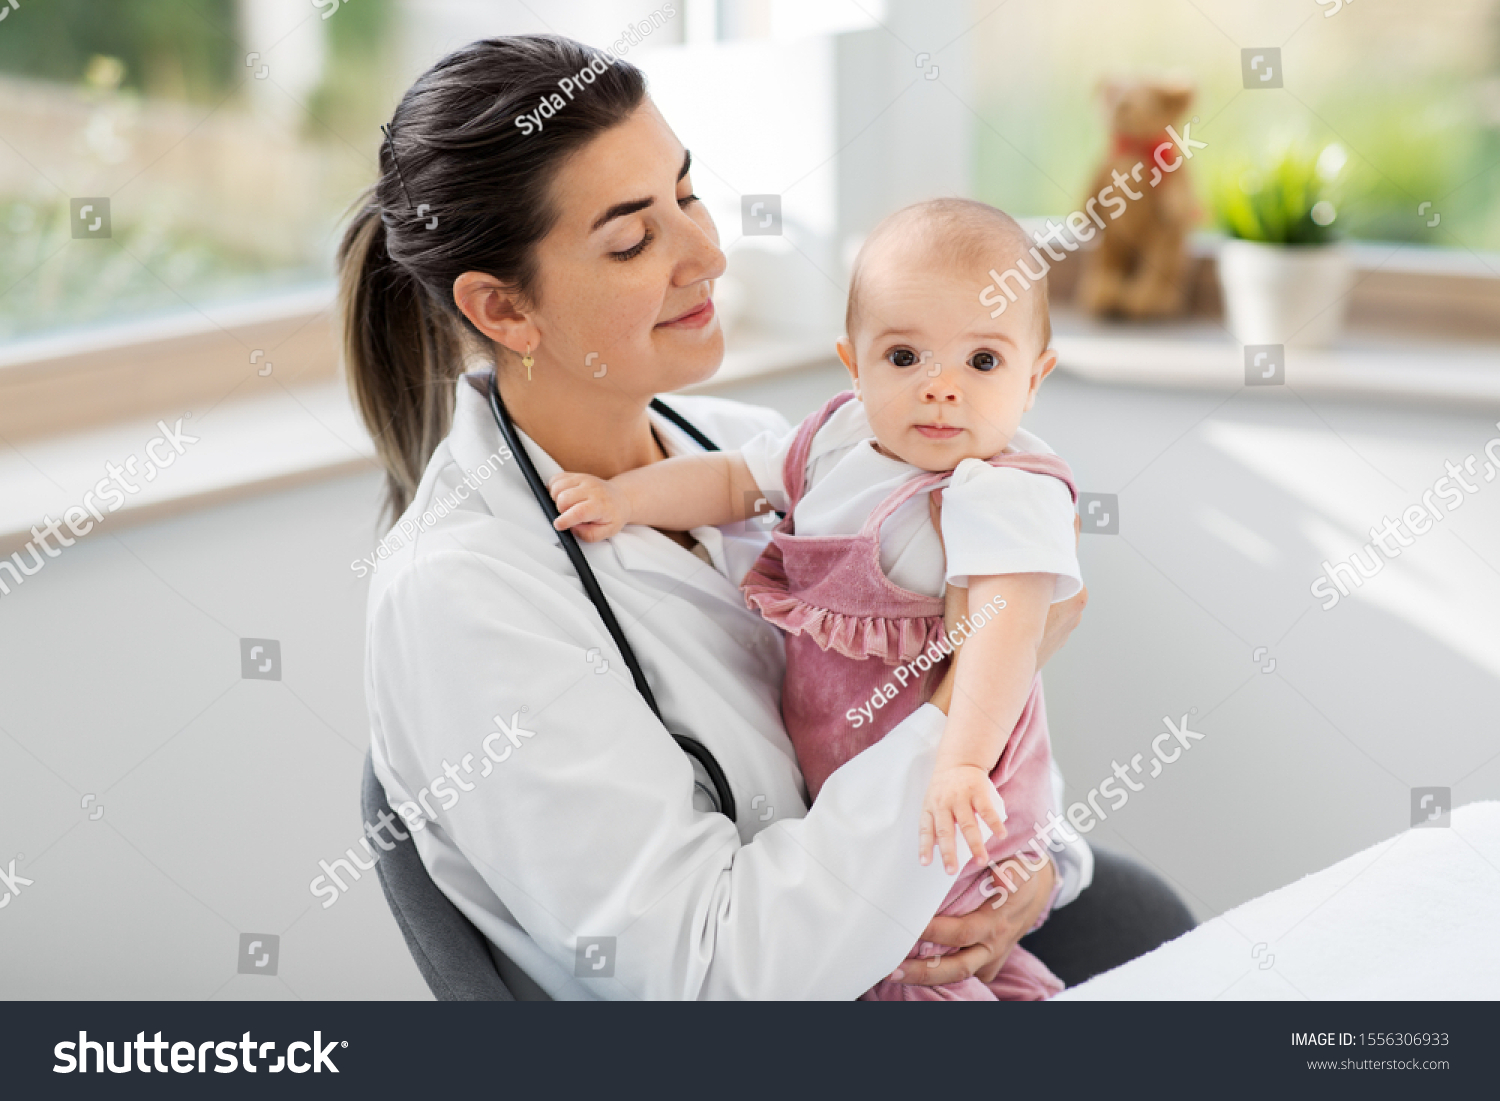 medicine, healthcare and pediatrics concept - smiling female pediatrician doctor or nurse holding baby girl patient at clinic or hospital #1556306933